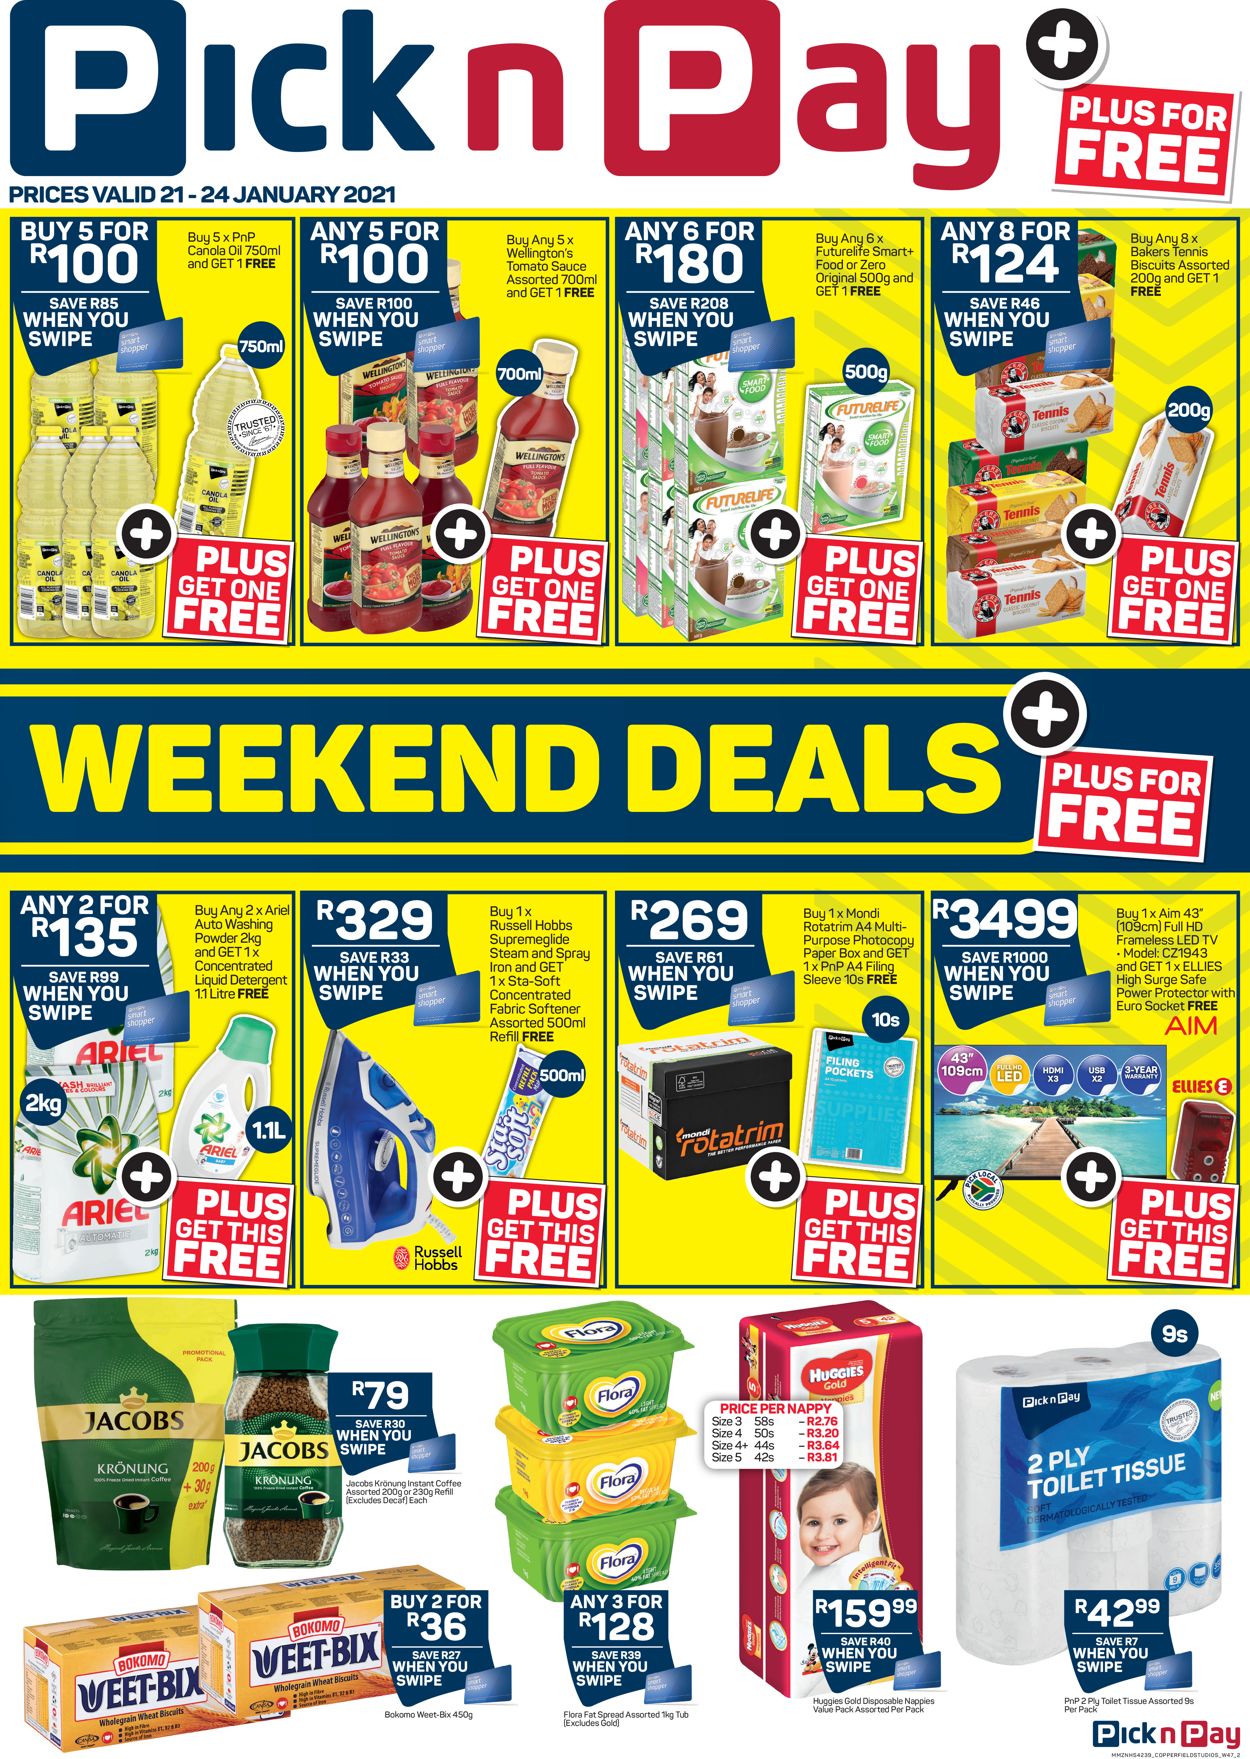 Pick n Pay Weekend Deals 2021 Catalogue - 2021/01/21-2021/01/24 (Page 2)